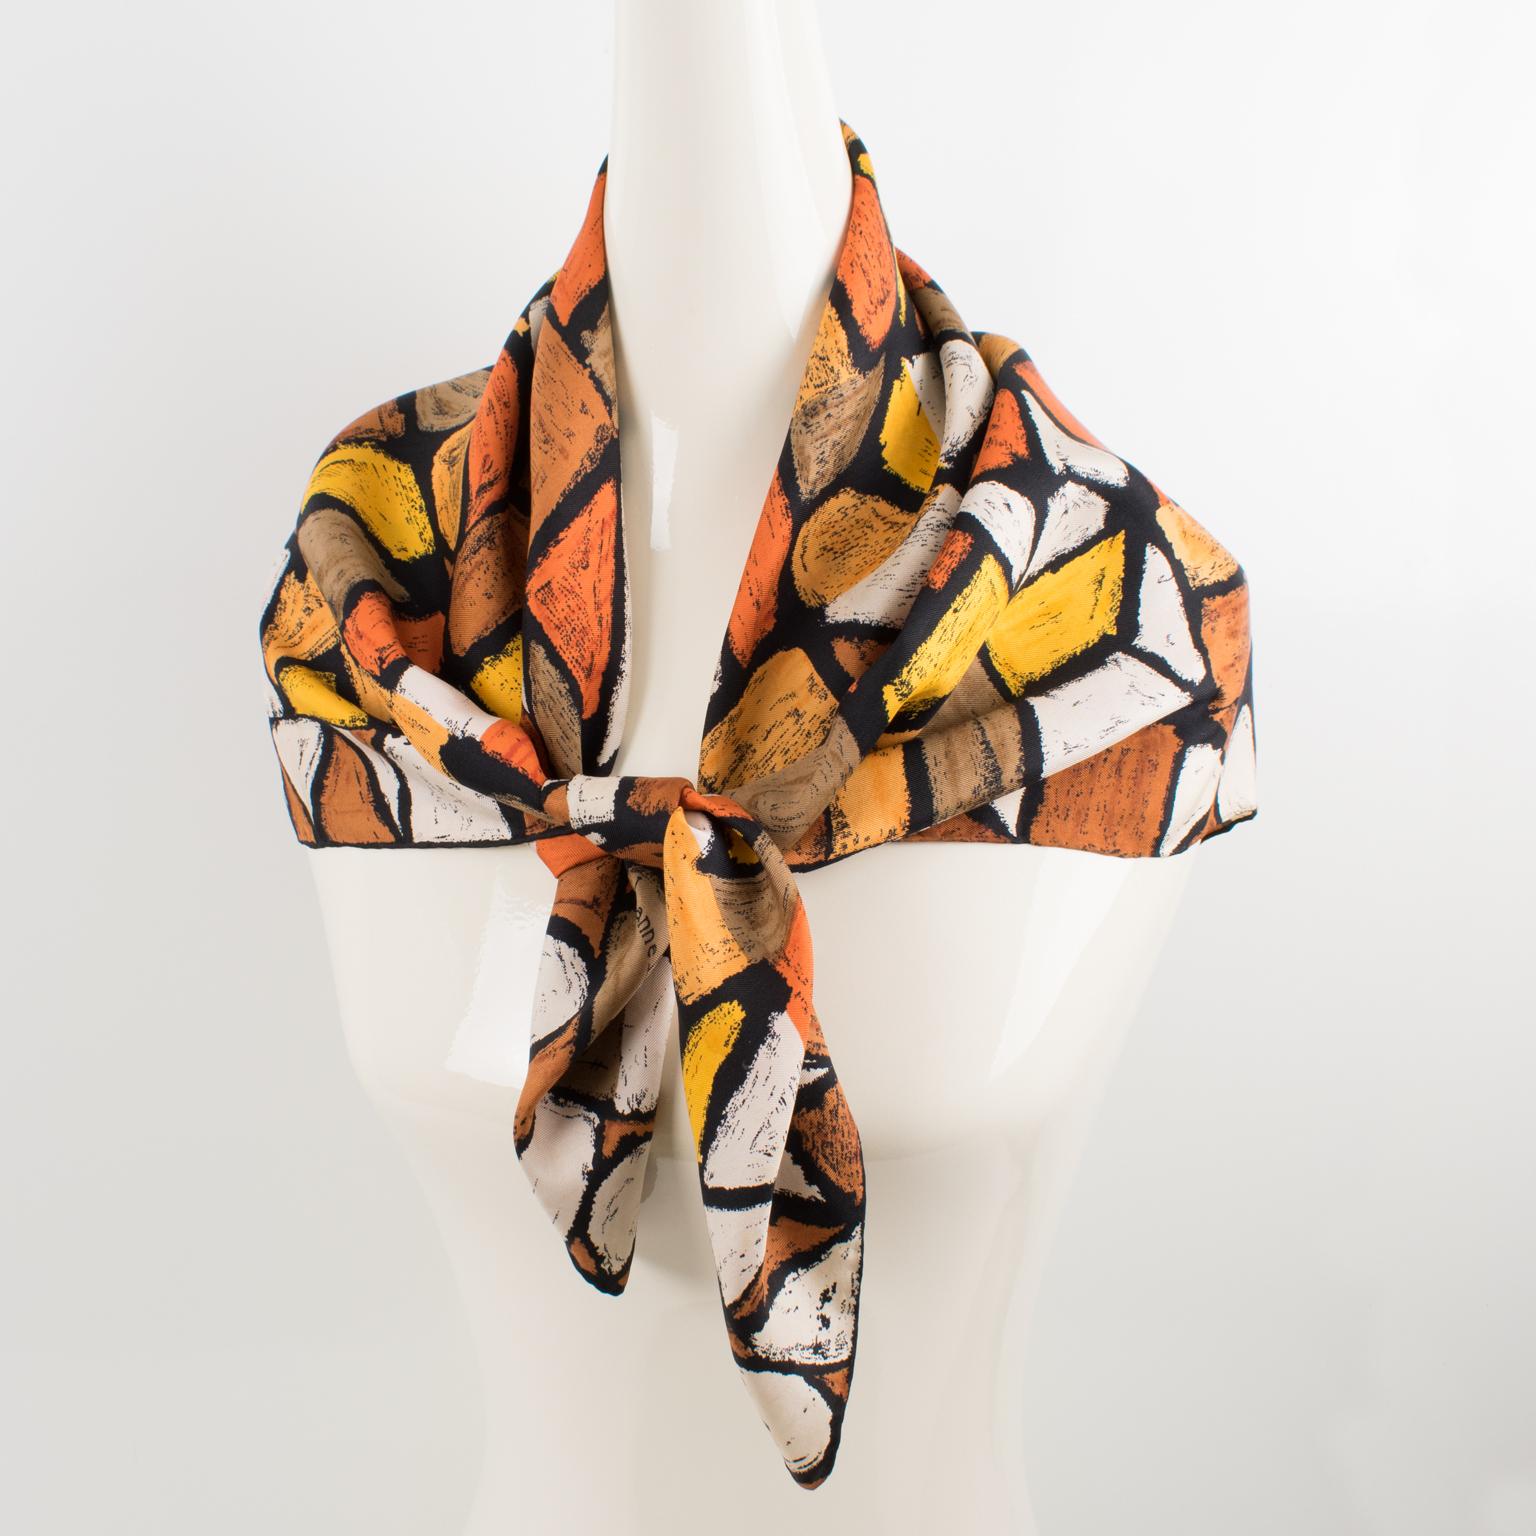 Antonio Castillo designed this lovely silk scarf for Jeanne Lanvin Paris in the 1950s. The design features graphic letters printed in chocolate brown, rust, and marigold colors and is signed on the bottom right corner by Jeanne Lanvin and Castillo.